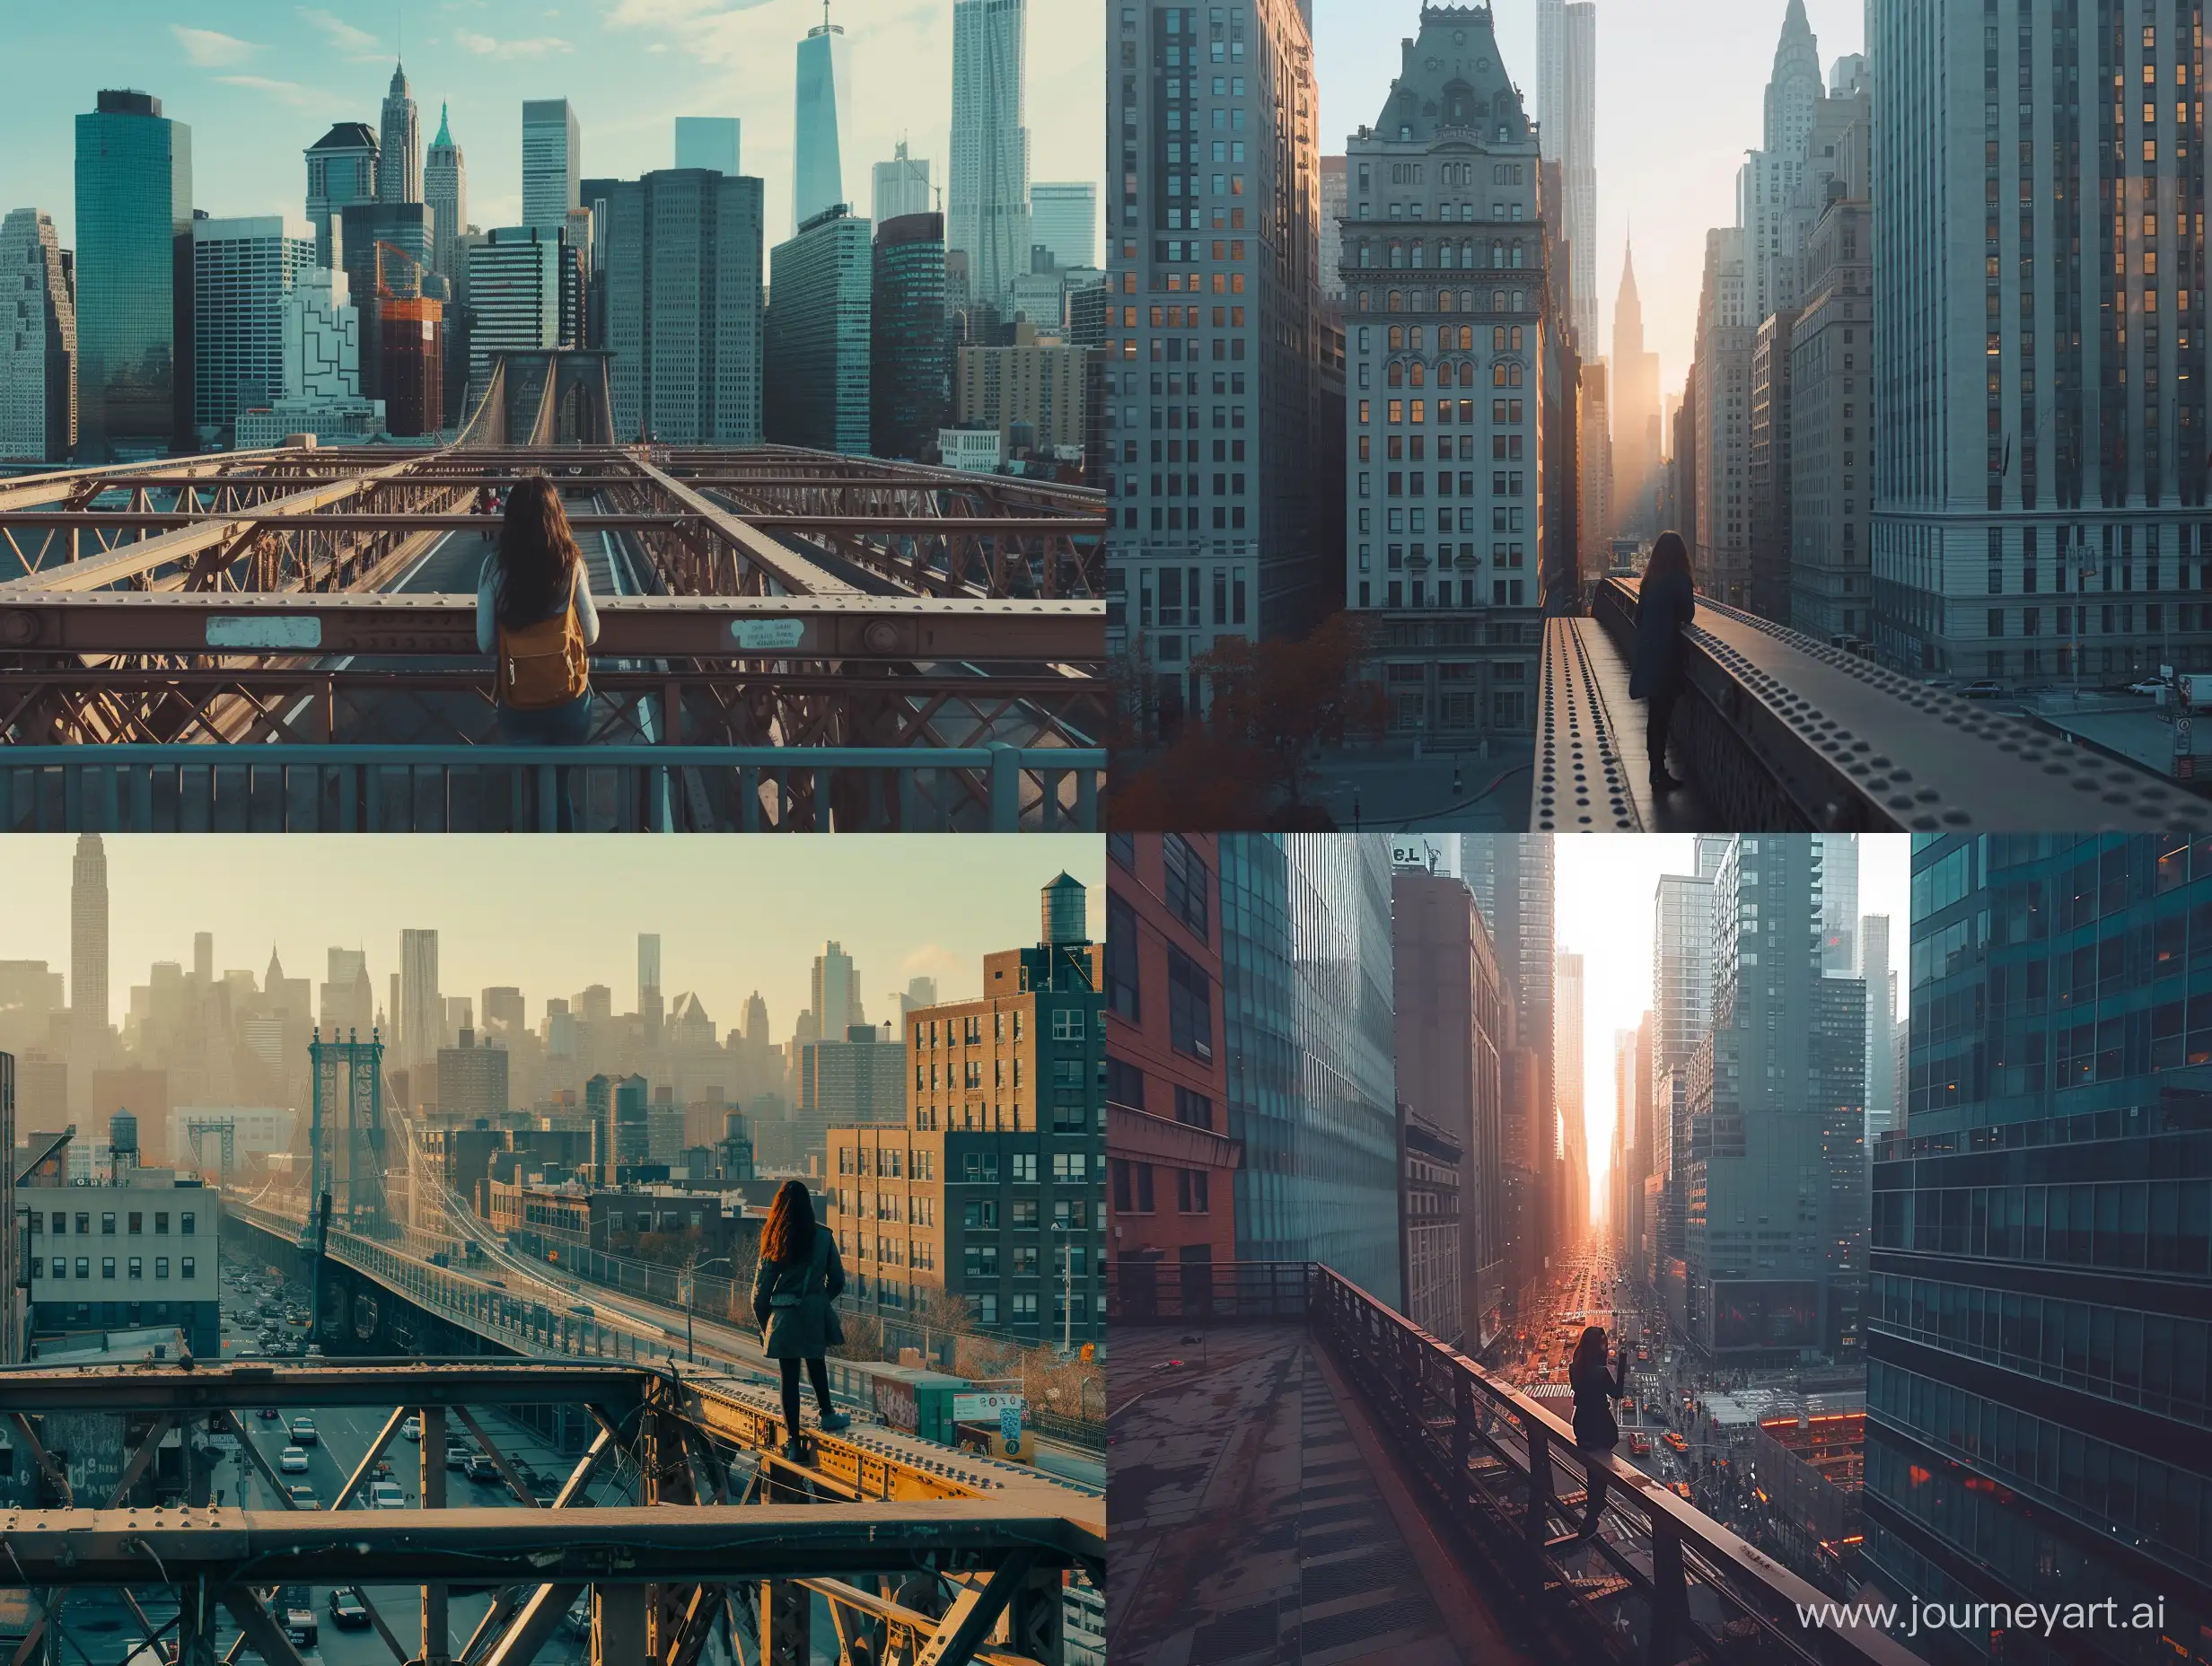 a bustling new new york city, the photo is bathed in natural lighting, day time setting. Shot in 4k with a high end DSLR camera. such as a Canon EOS R5 with a 50mm f/1. 2 lens, architecture, drone view, skyline, a woman standing on a bridge